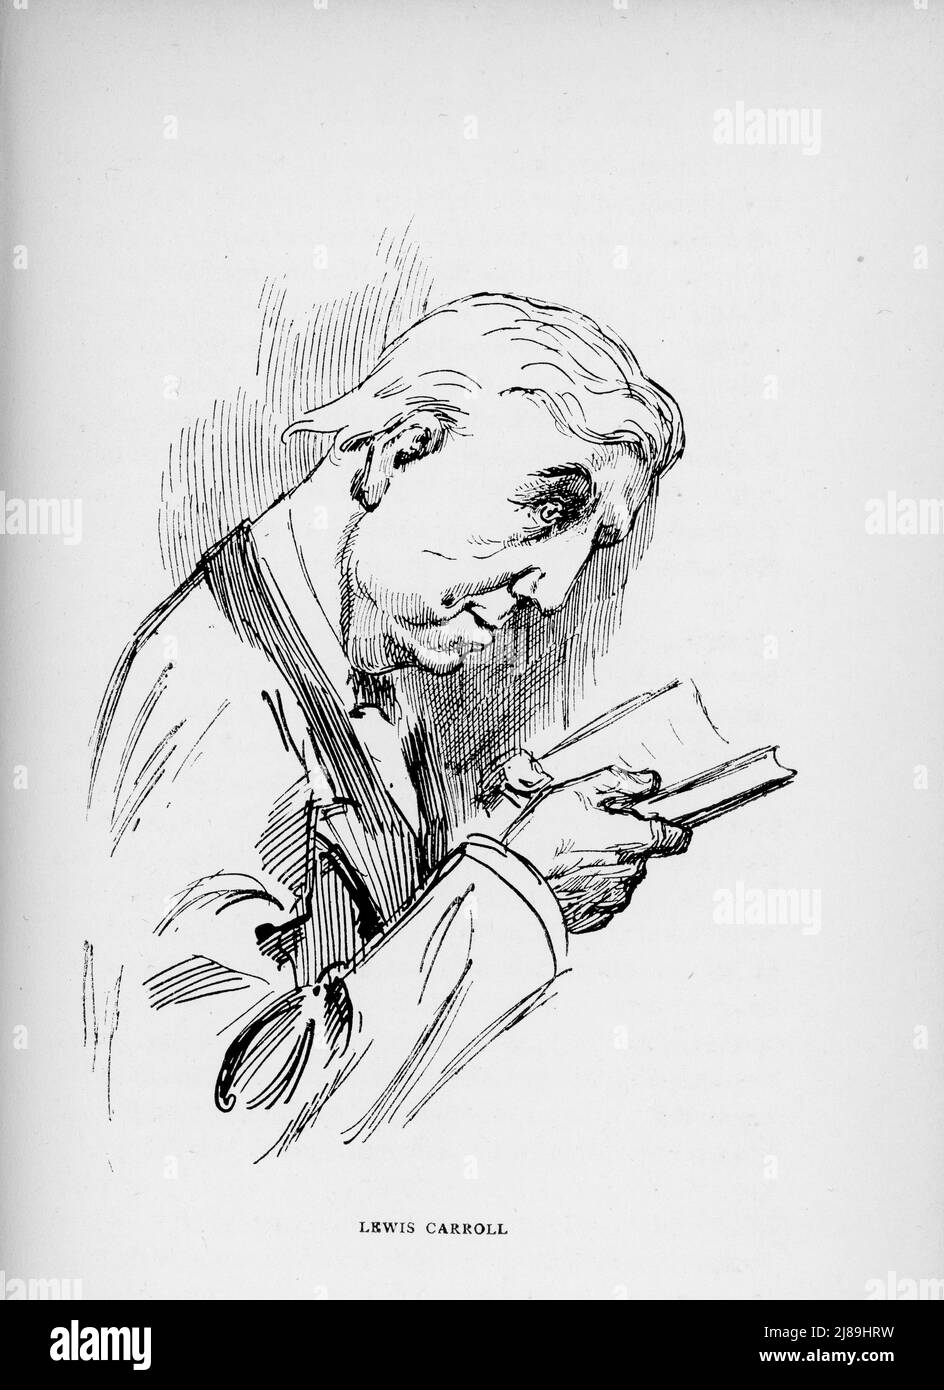 Lewis Carroll (1832-1898), 1924. By Harry Furniss (1854-1925). Charles Lutwidge Dodgson (1832-1898), better known by his pen name Lewis Carroll, English author, poet and mathematician. Stock Photo